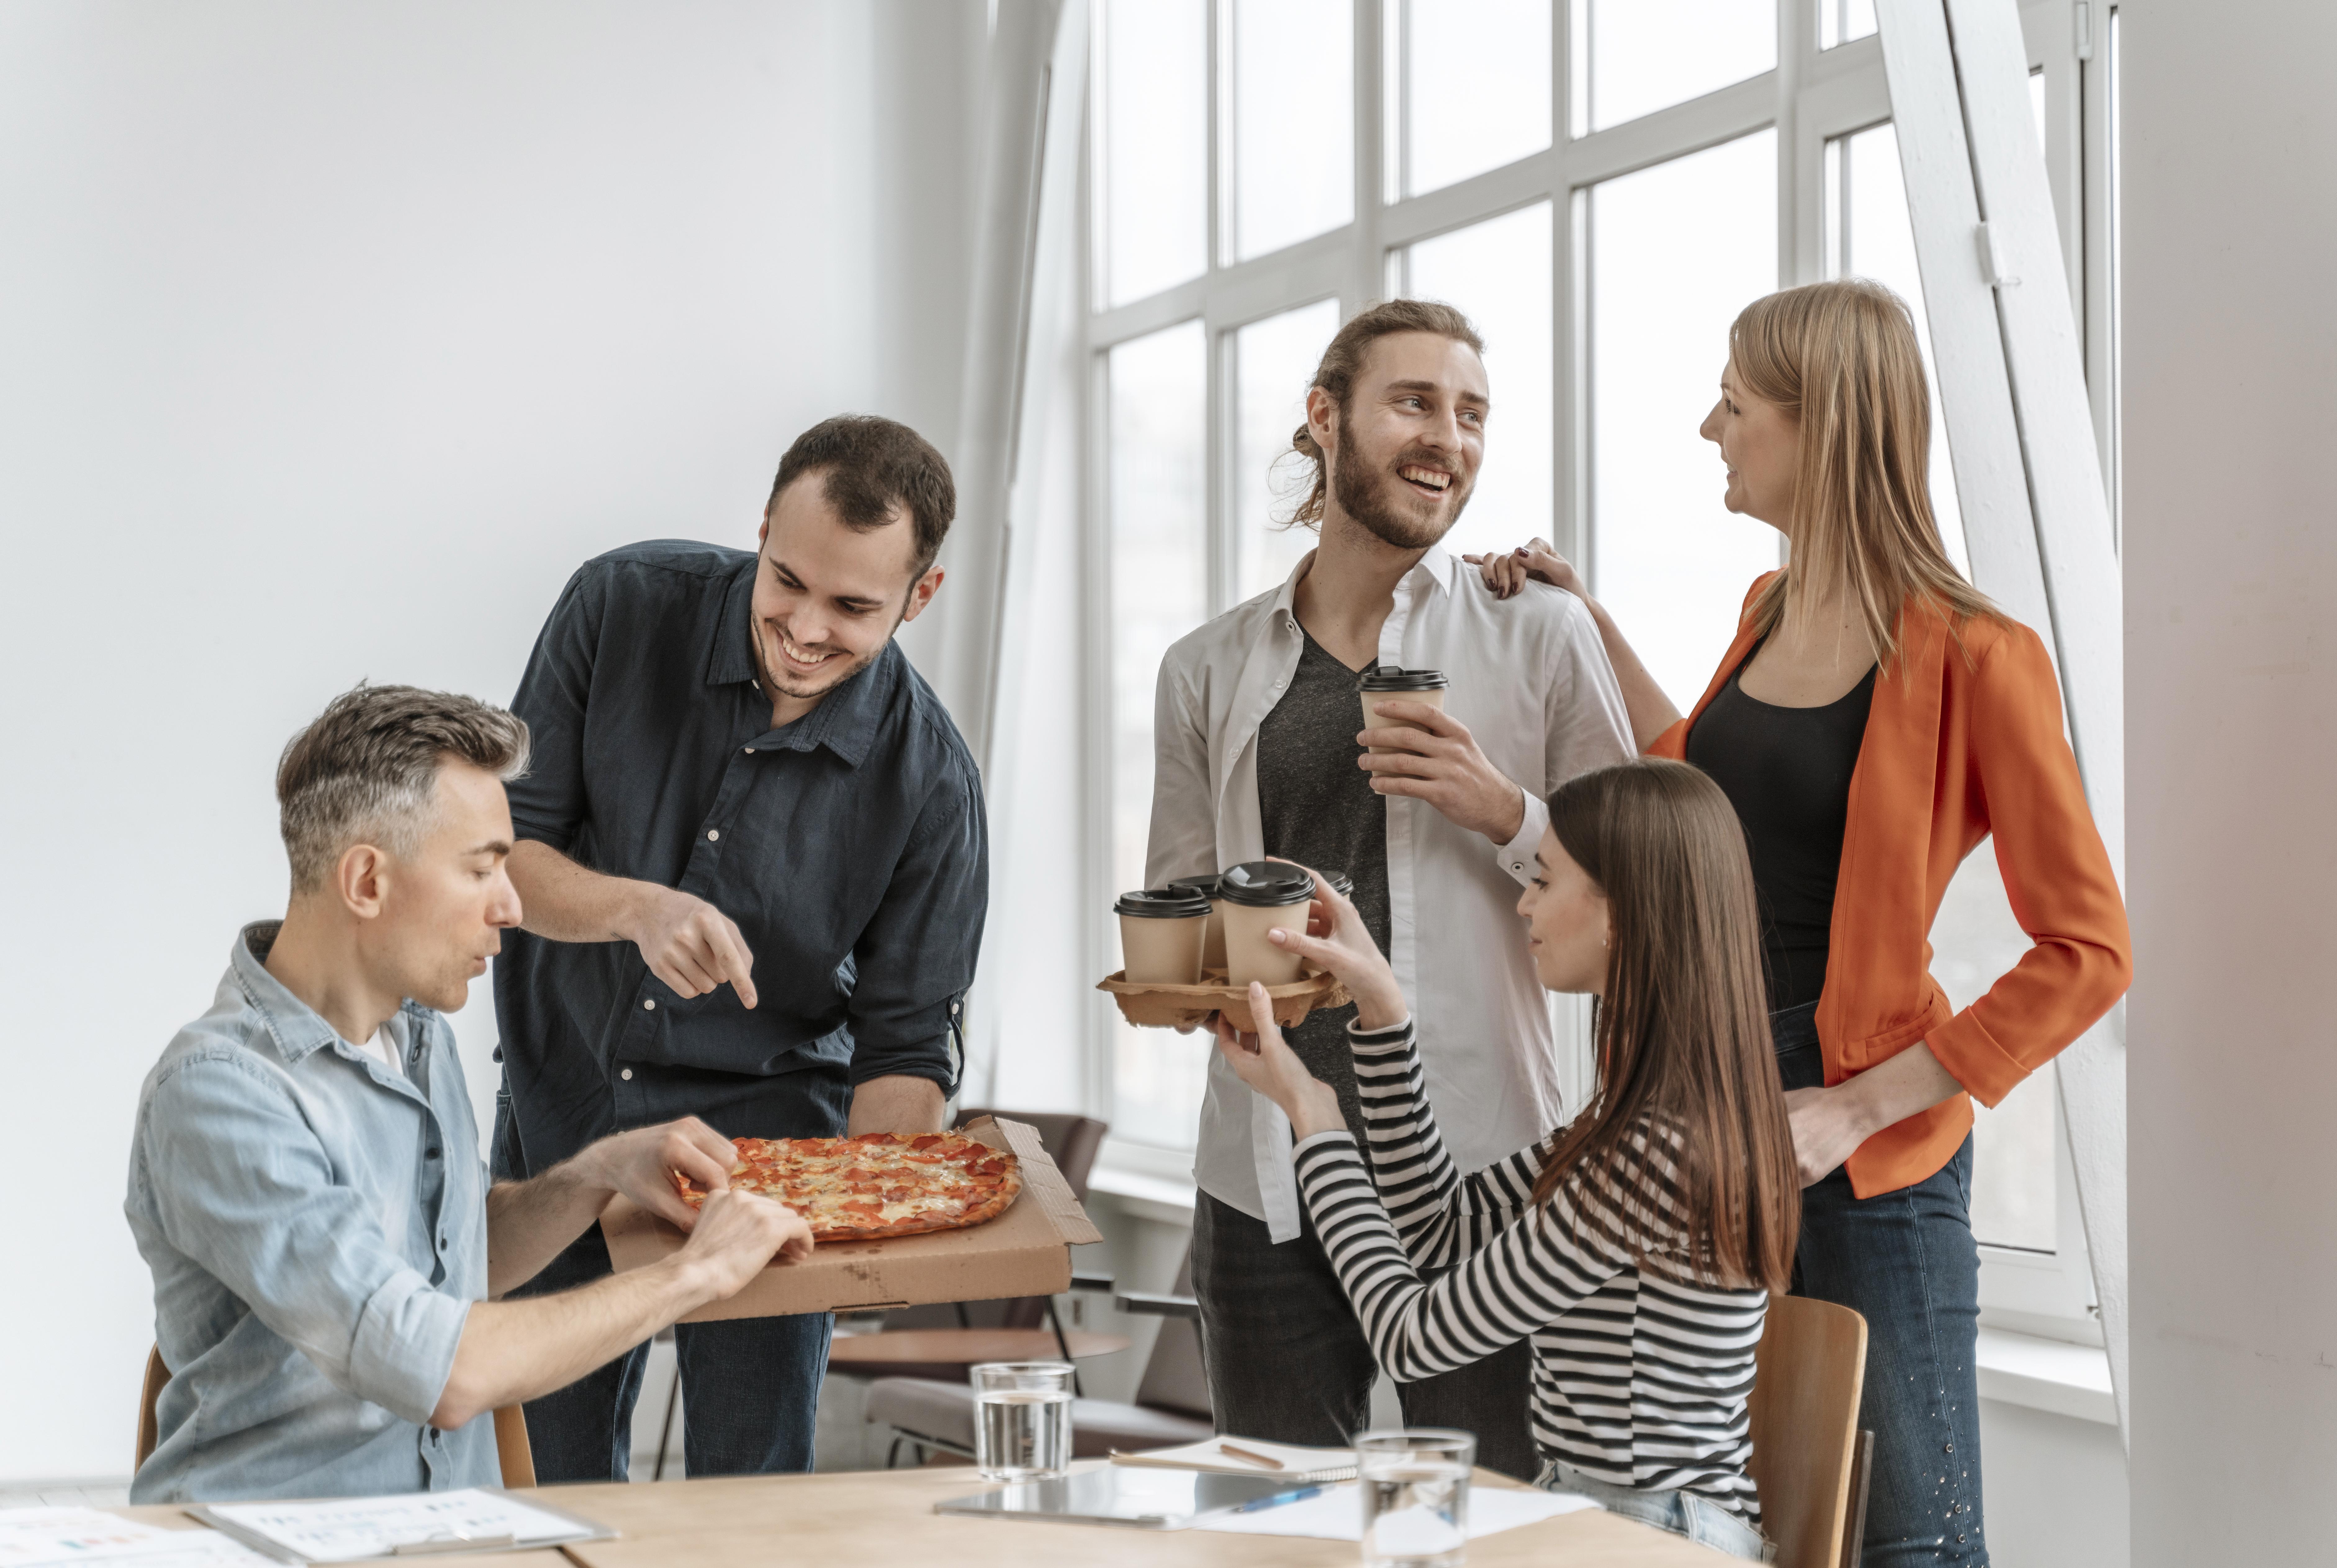 businesspeople-lunch-break-eating-pizza